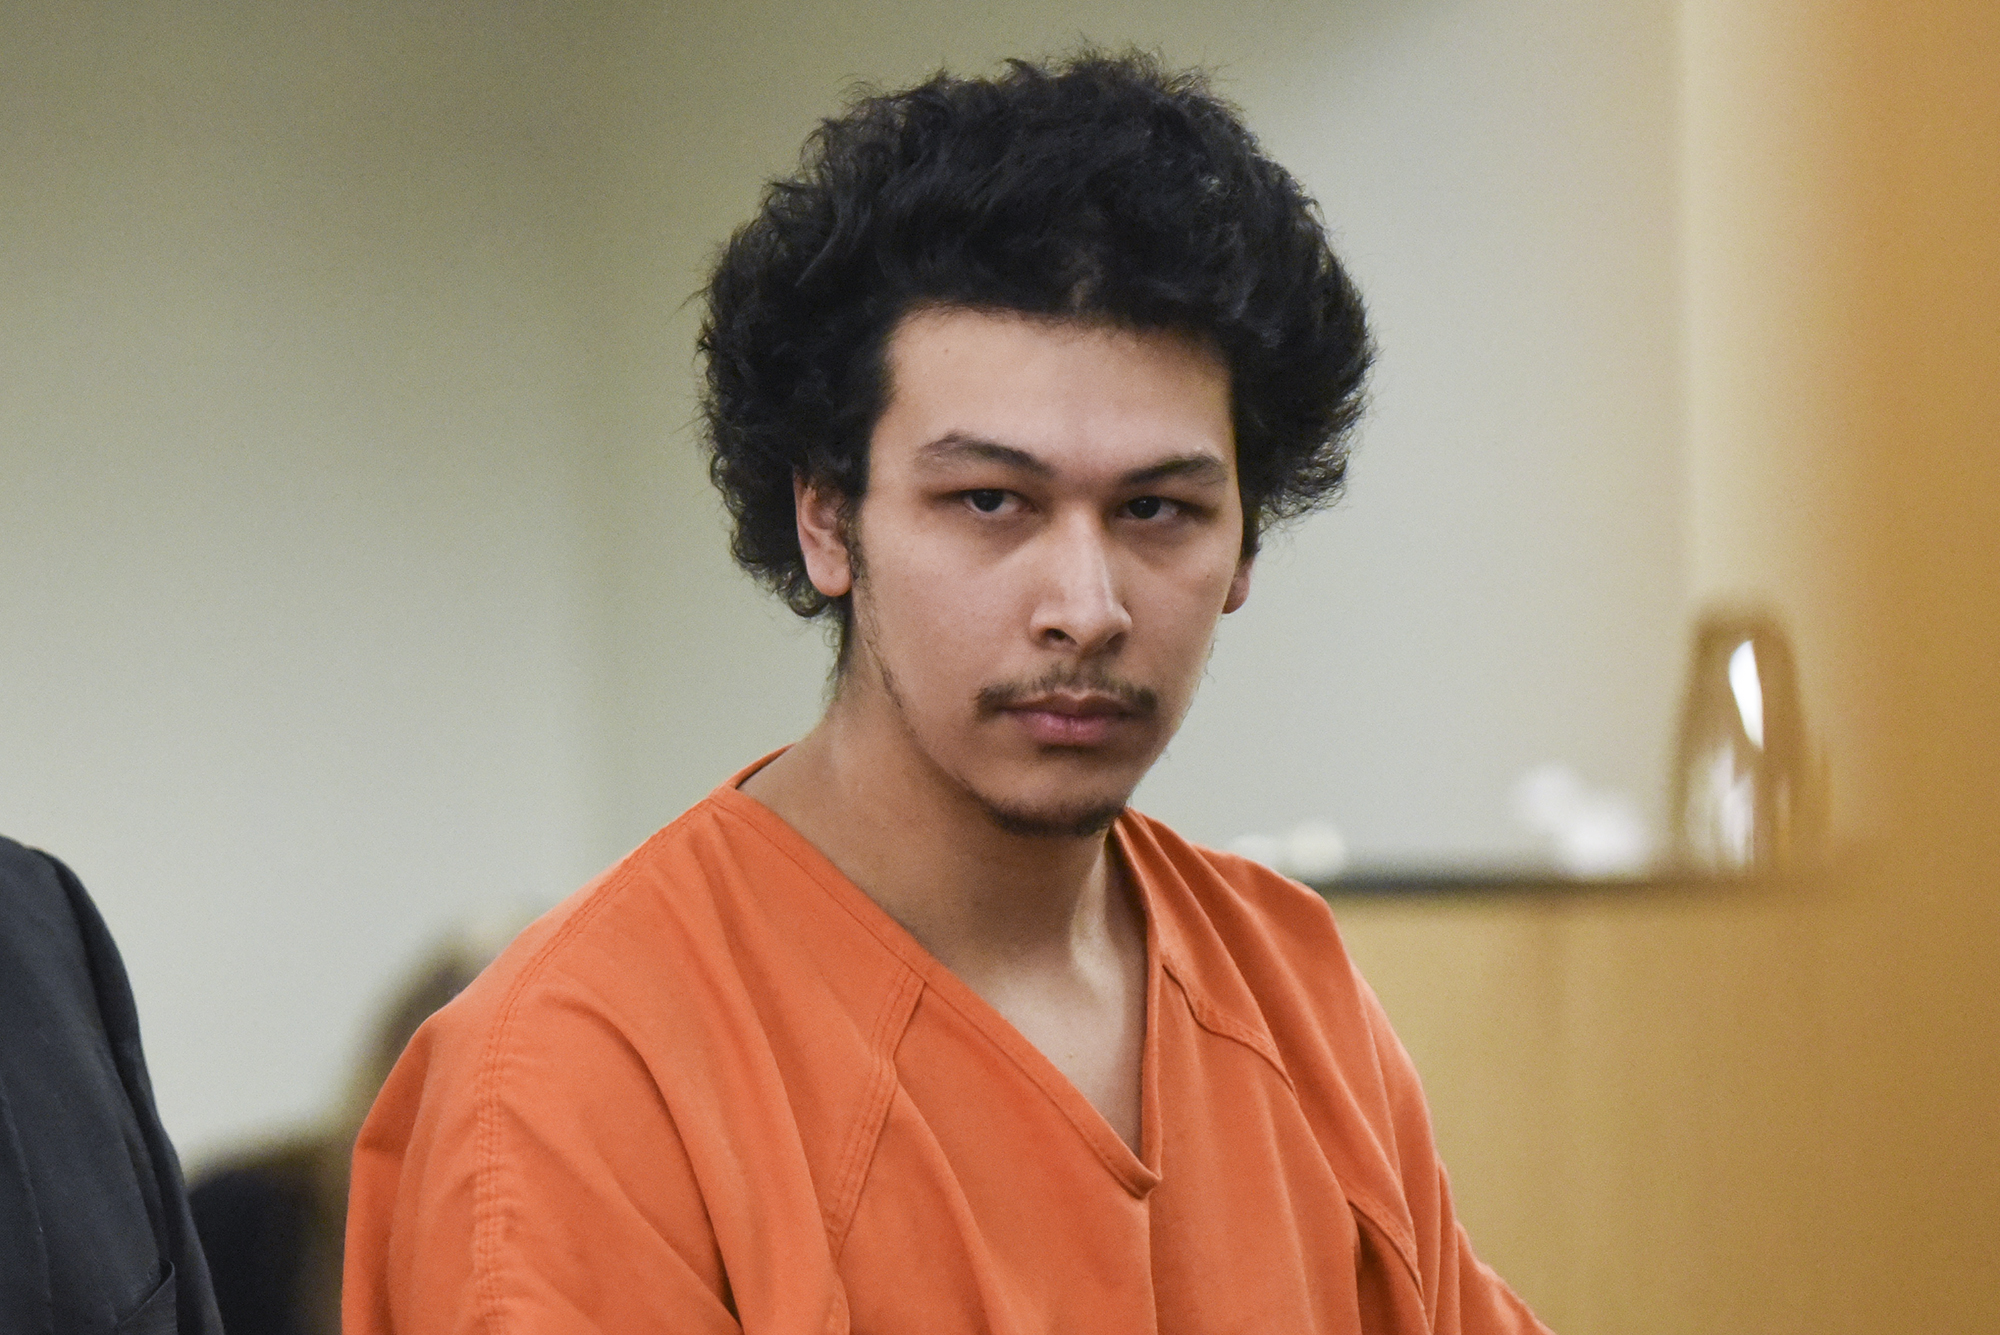 Ernesto Estrada-Tapia, 24, makes a first appearance Monday, Feb. 6, in Clark County Superior Court on a warrant charging him with vehicular homicide and hit-and-run driving causing injury or death in connection with the death of a Vancouver man in January.